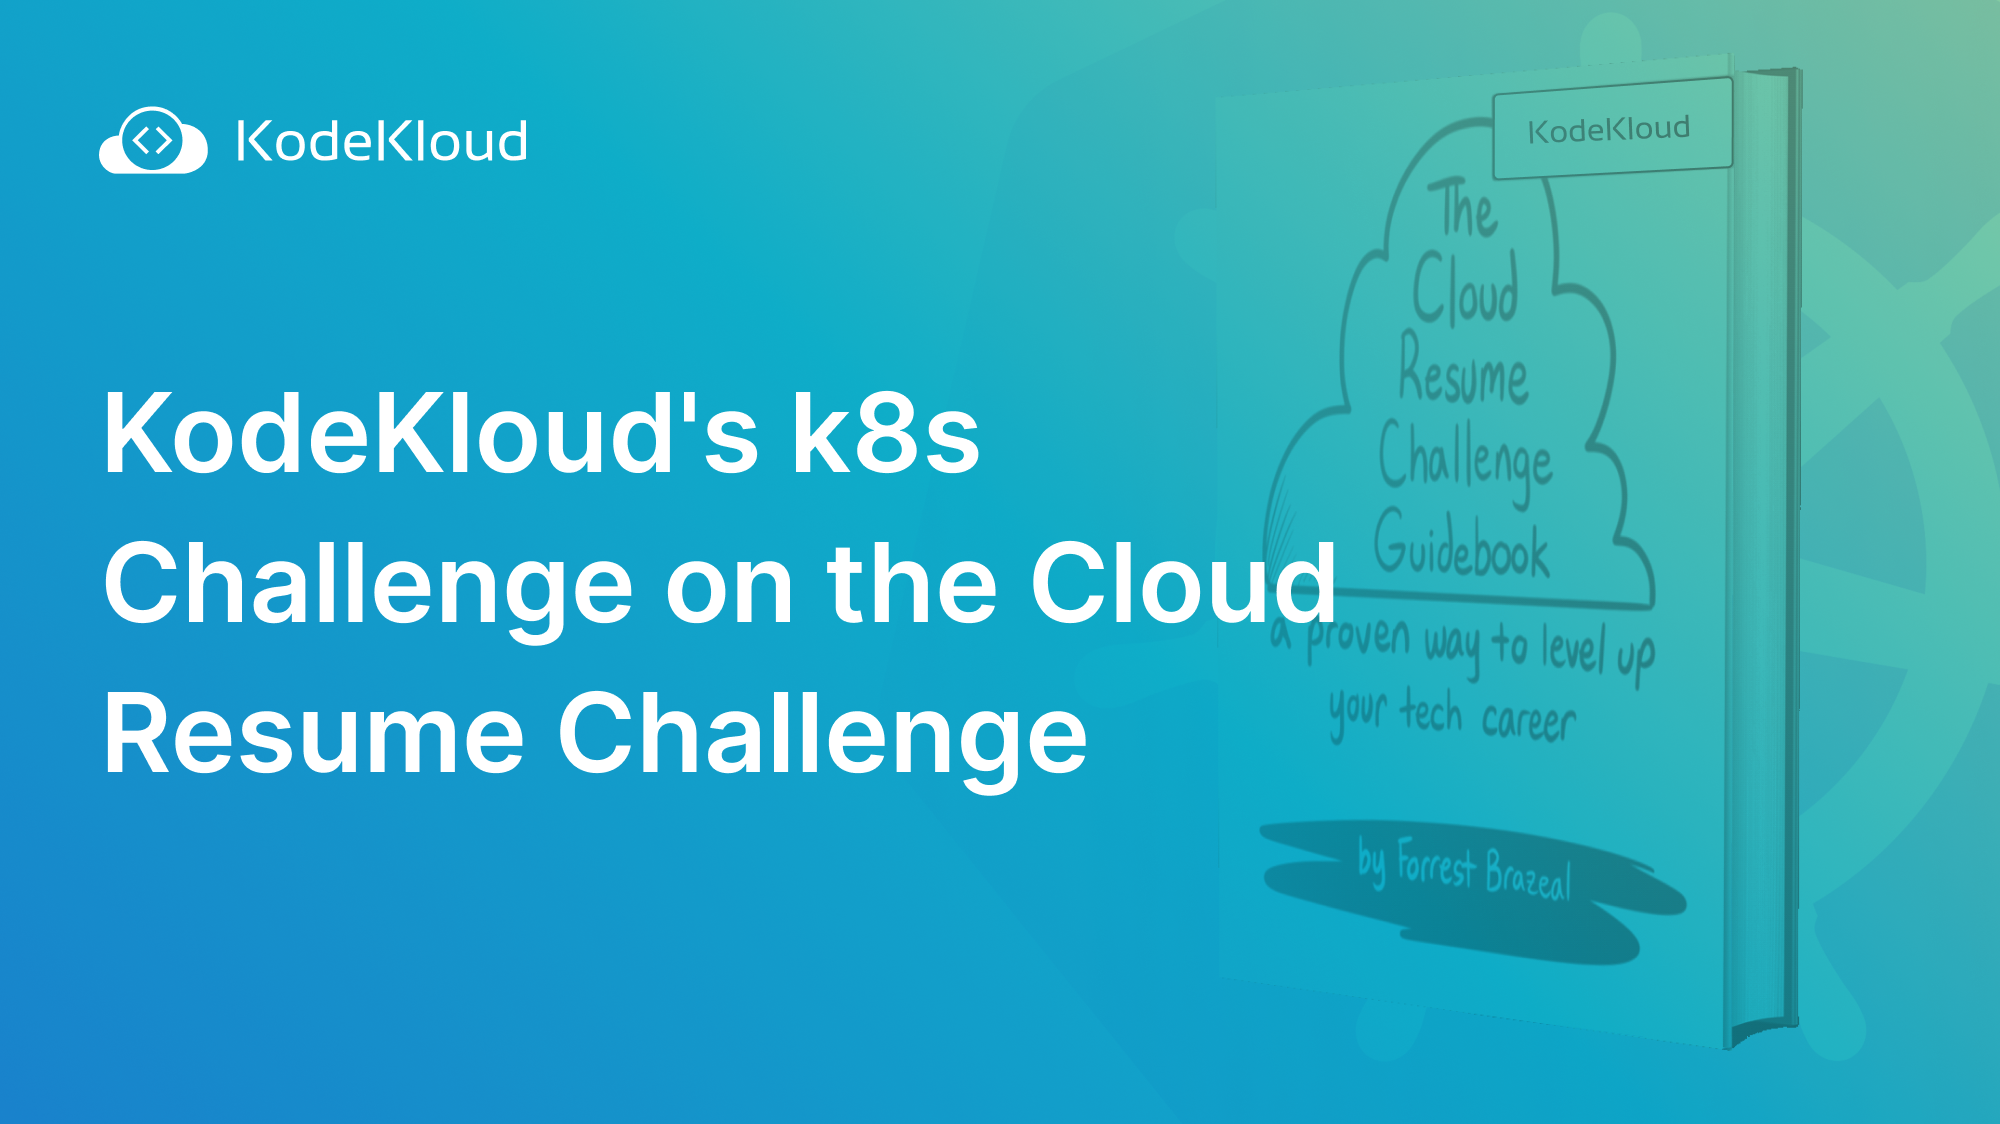 Upskill Your Hands-On Cloud Expertise - KodeKloud's k8s Challenge on the Cloud Resume Challenge